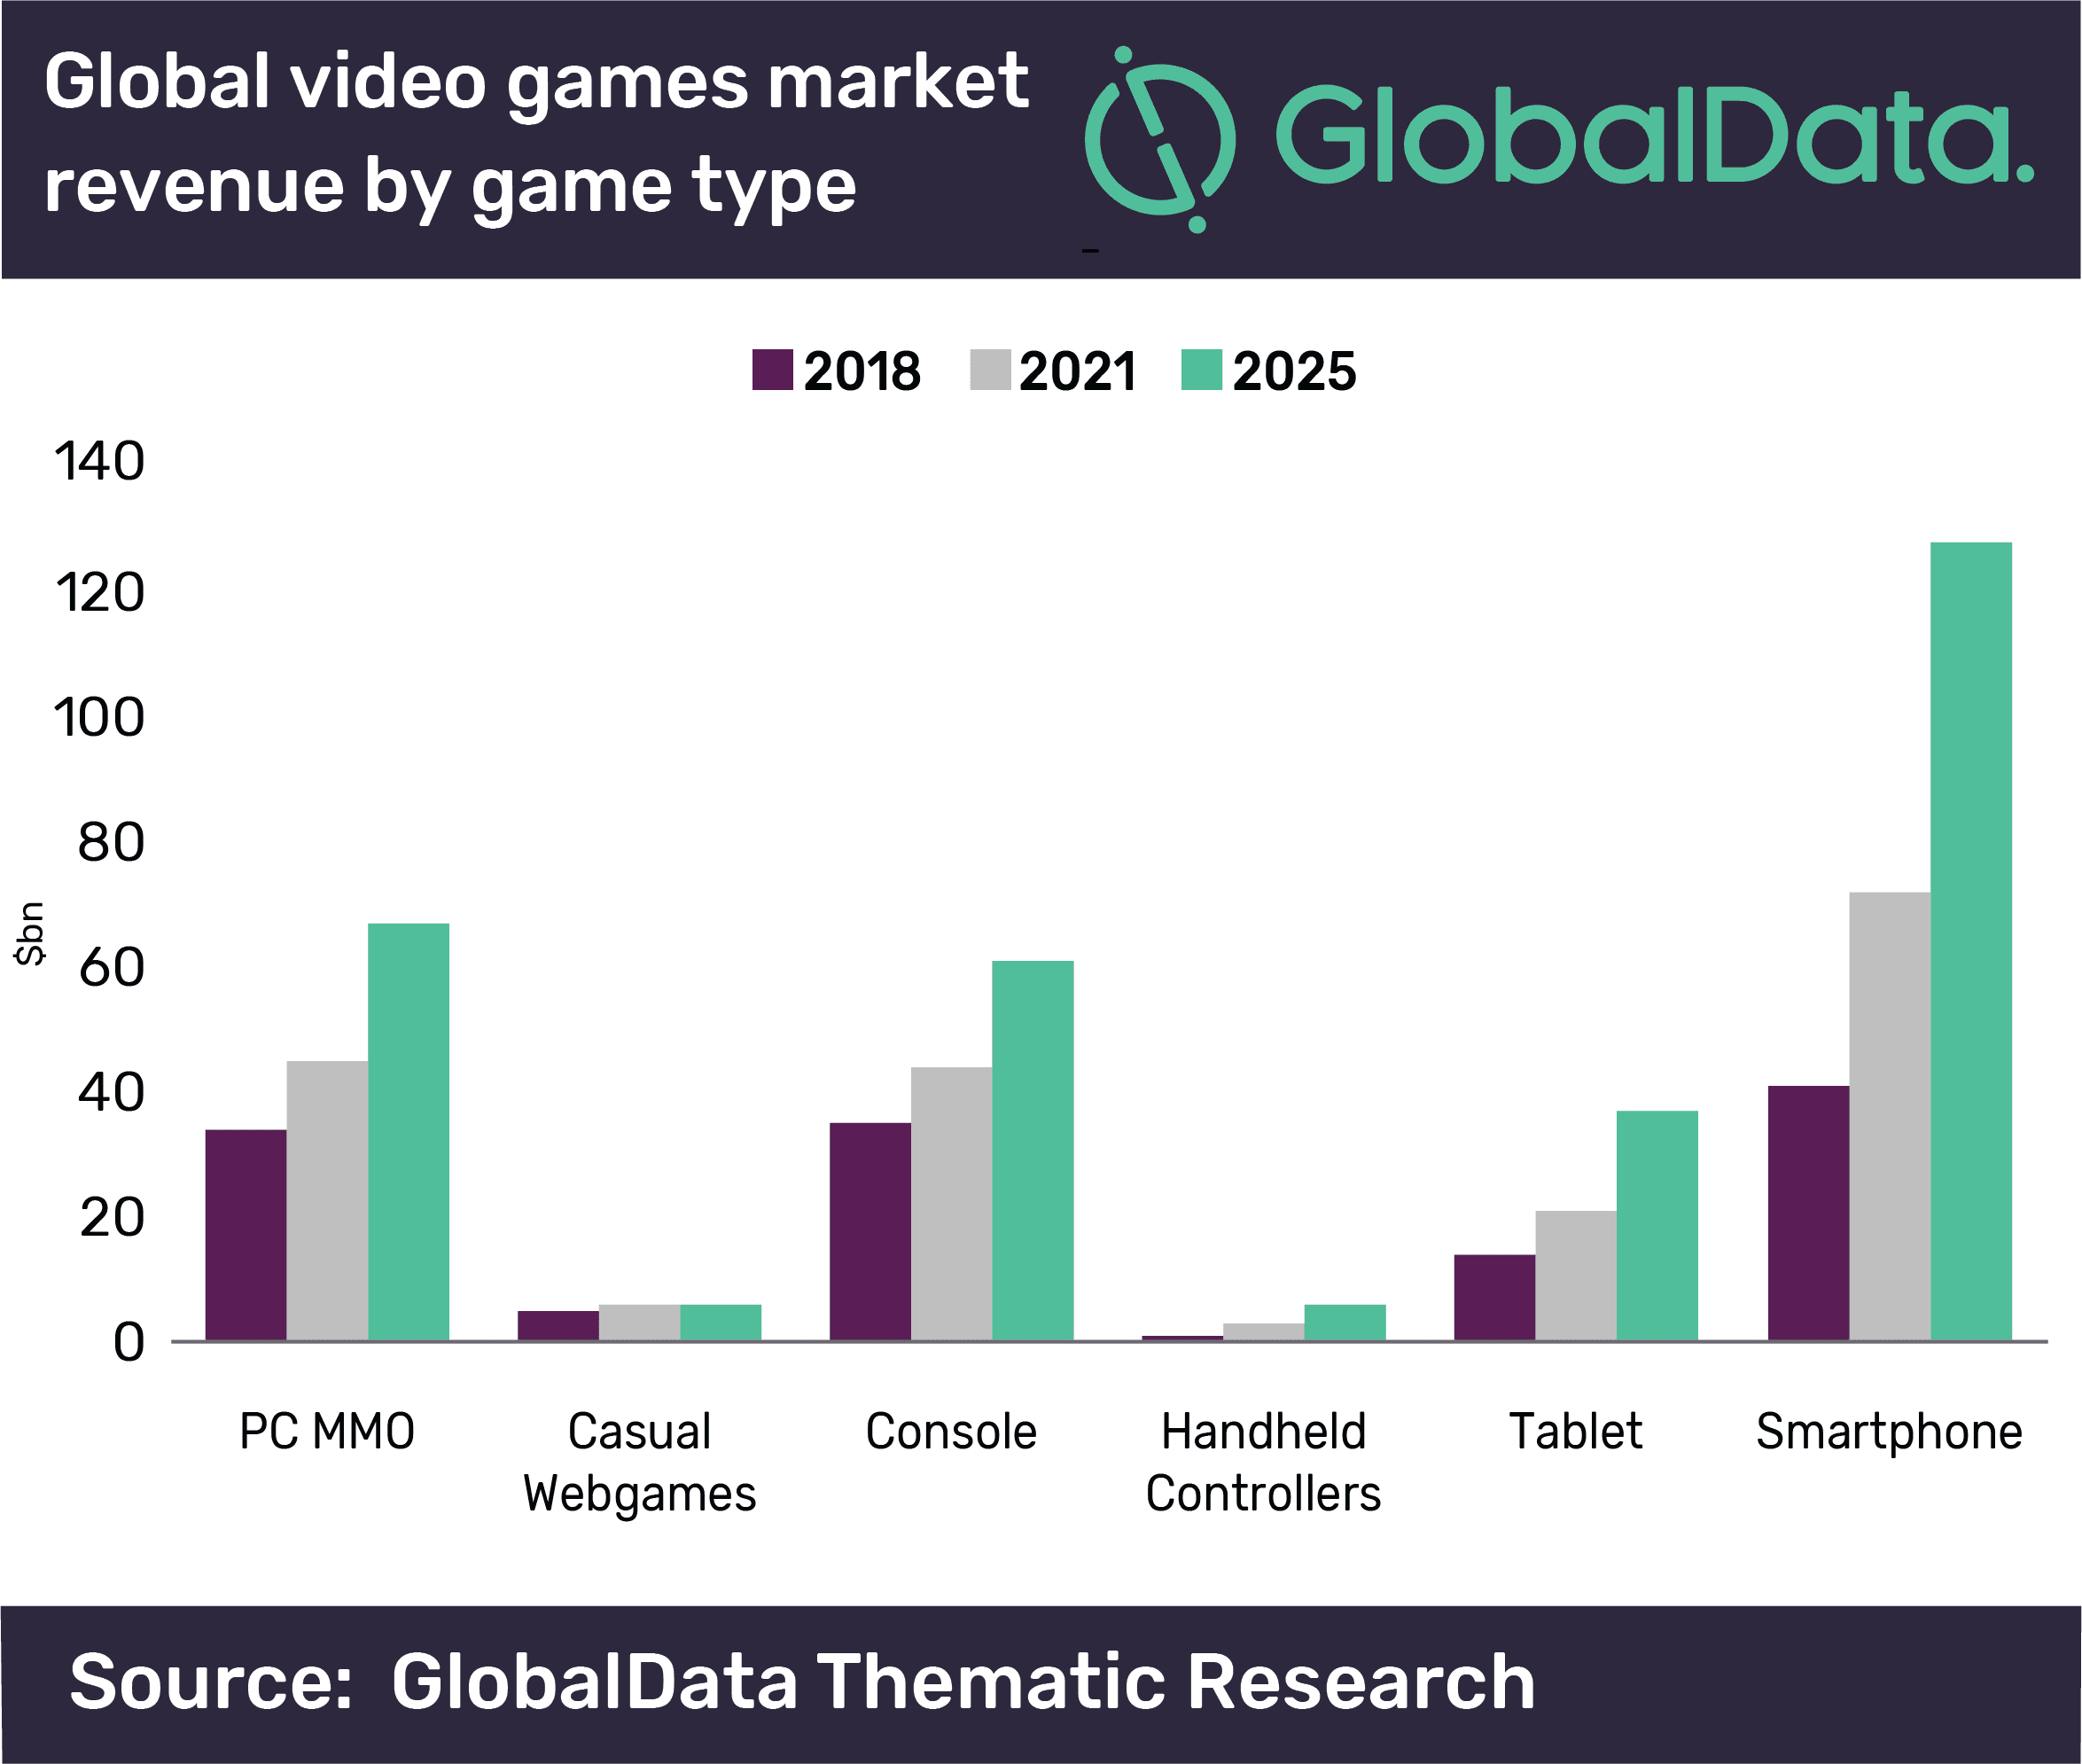 Global Video Games market revenue by game type.